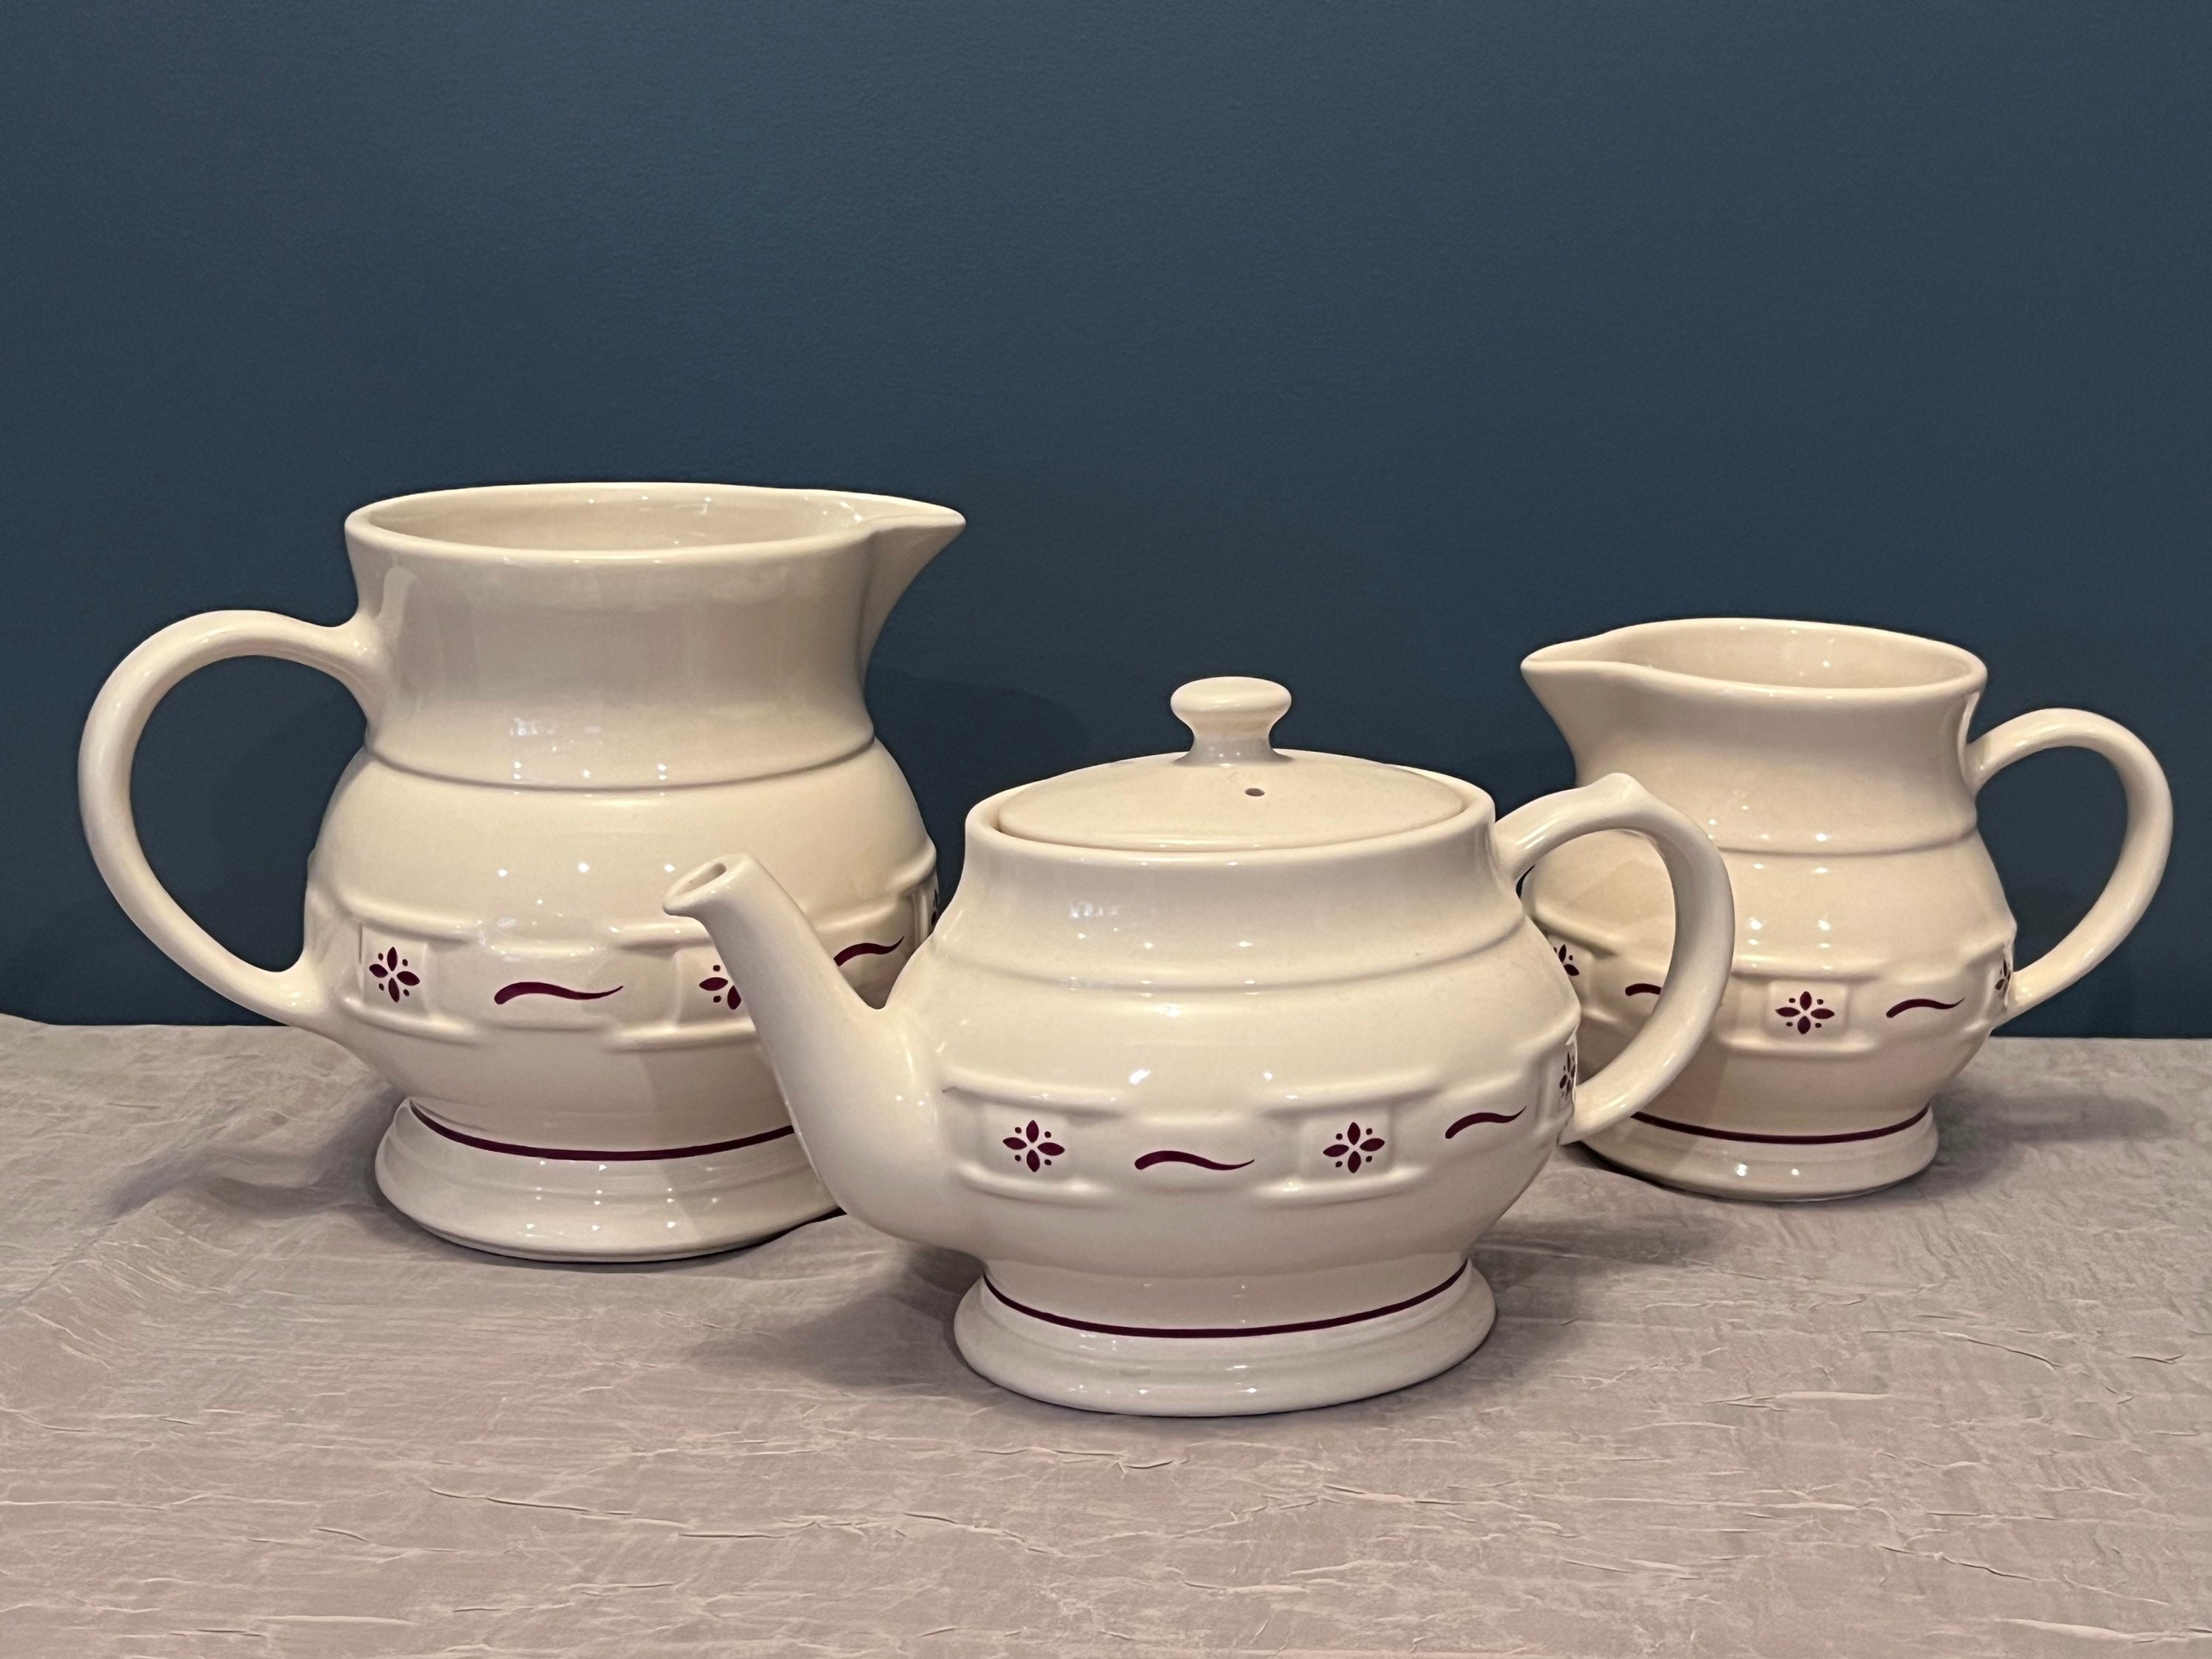 Longaberger Pottery - Teapot And Teacups for Sale in Port Orchard, WA -  OfferUp